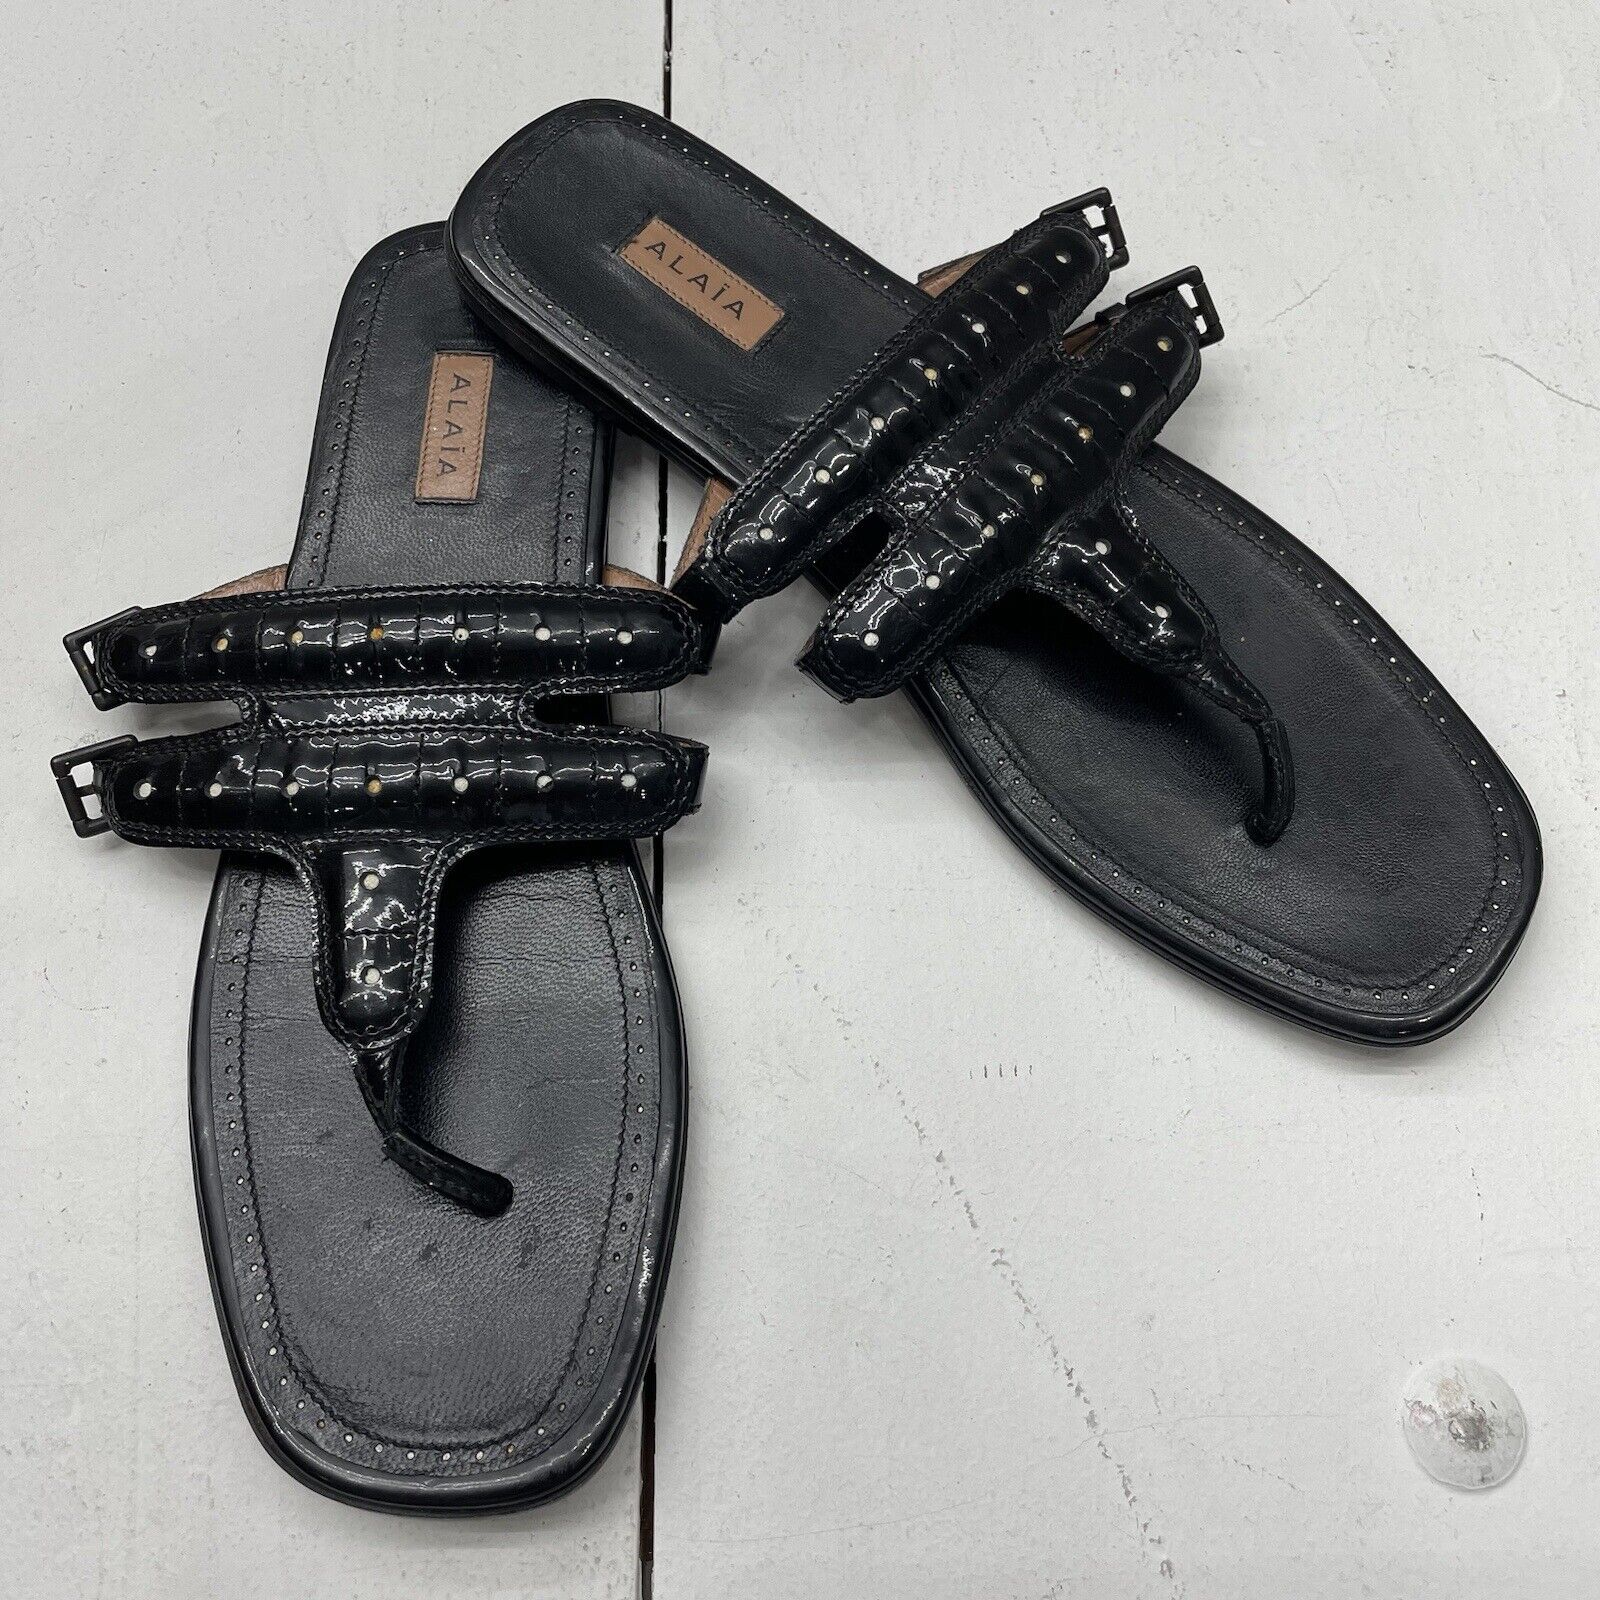 Alaia Paris Black Patent Leather Sandal Made In Italy Womens Size US 7.5 EU 38.5